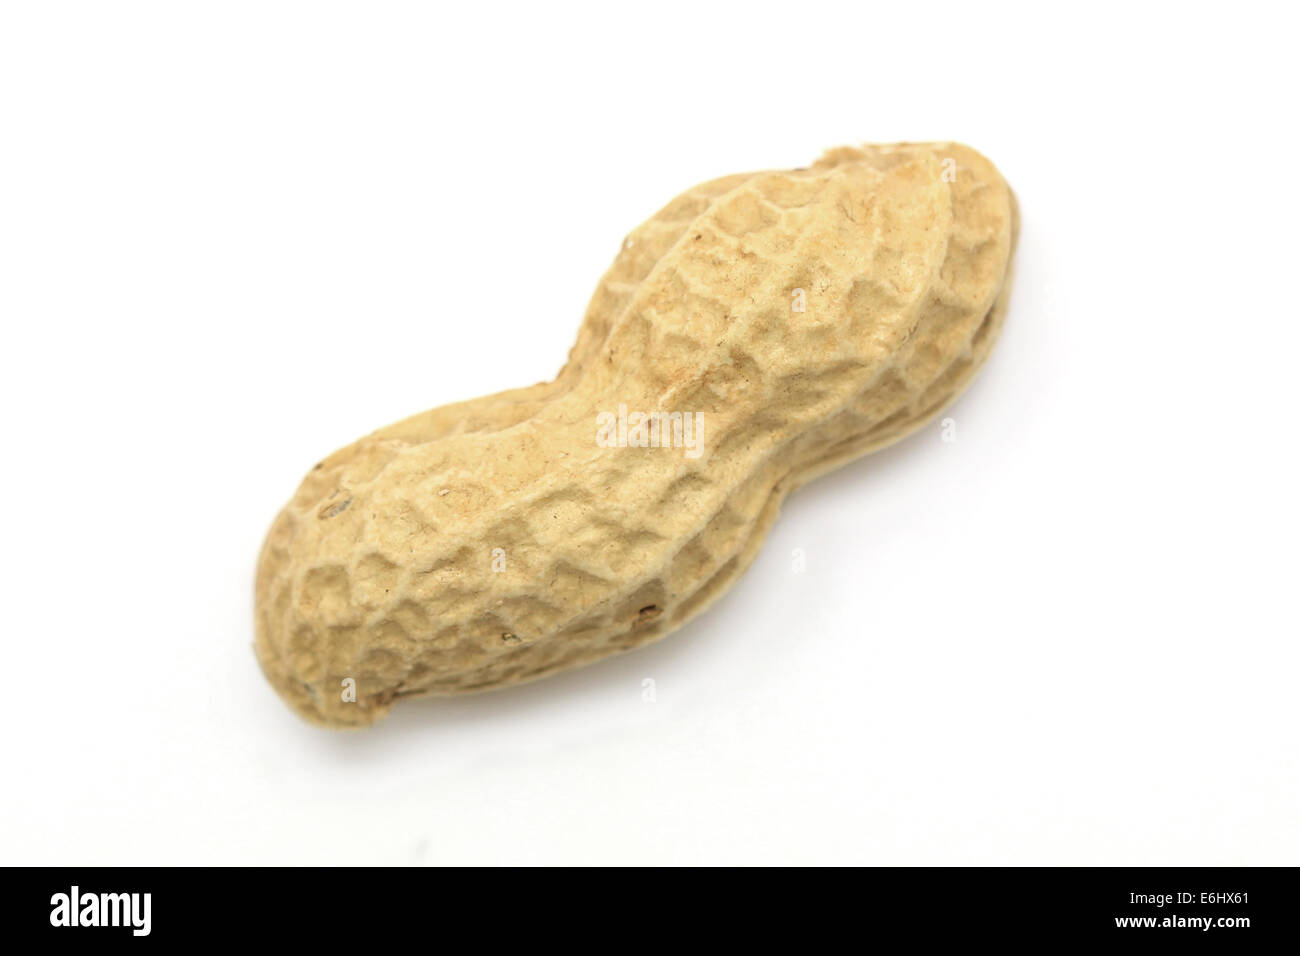 Dried peanut isolated on white background Stock Photo